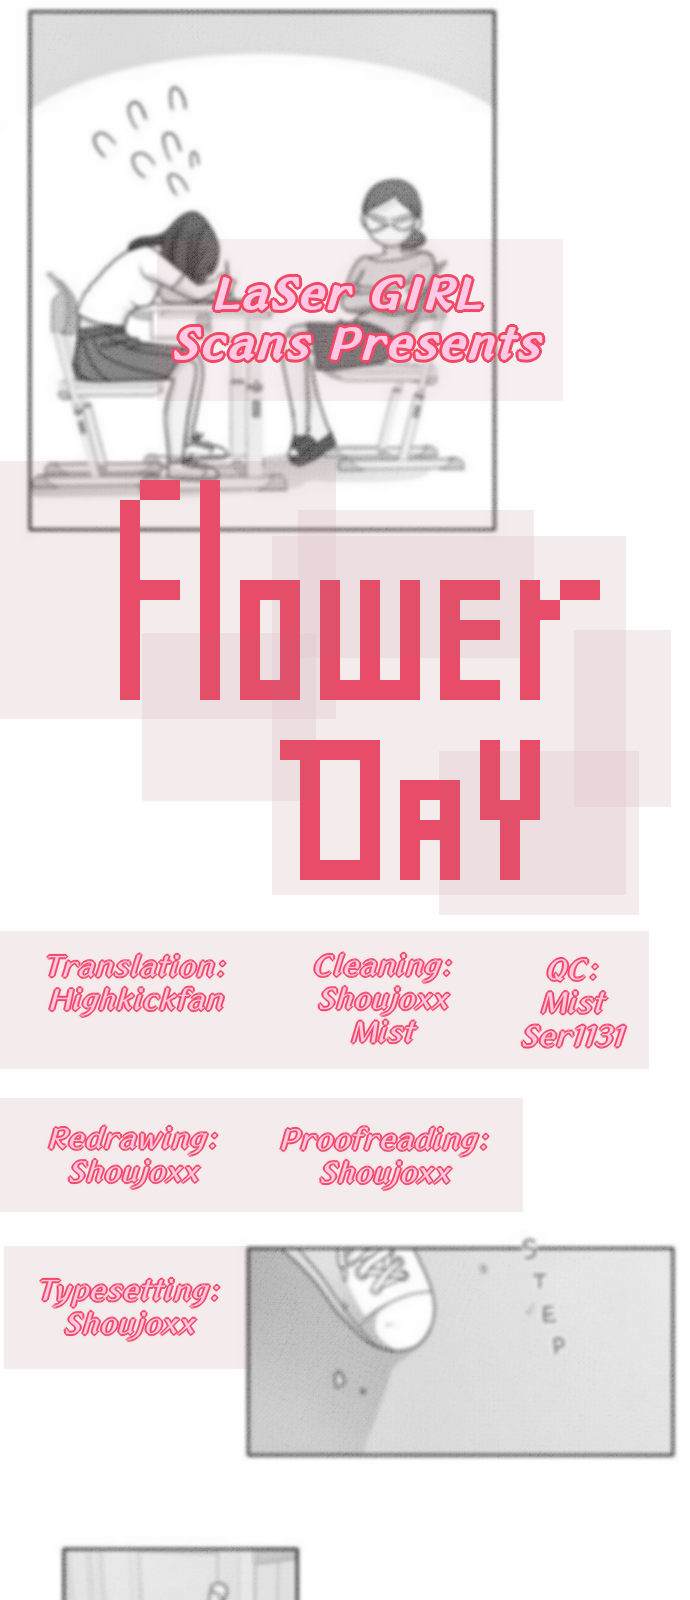 Flower Day Chapter 03